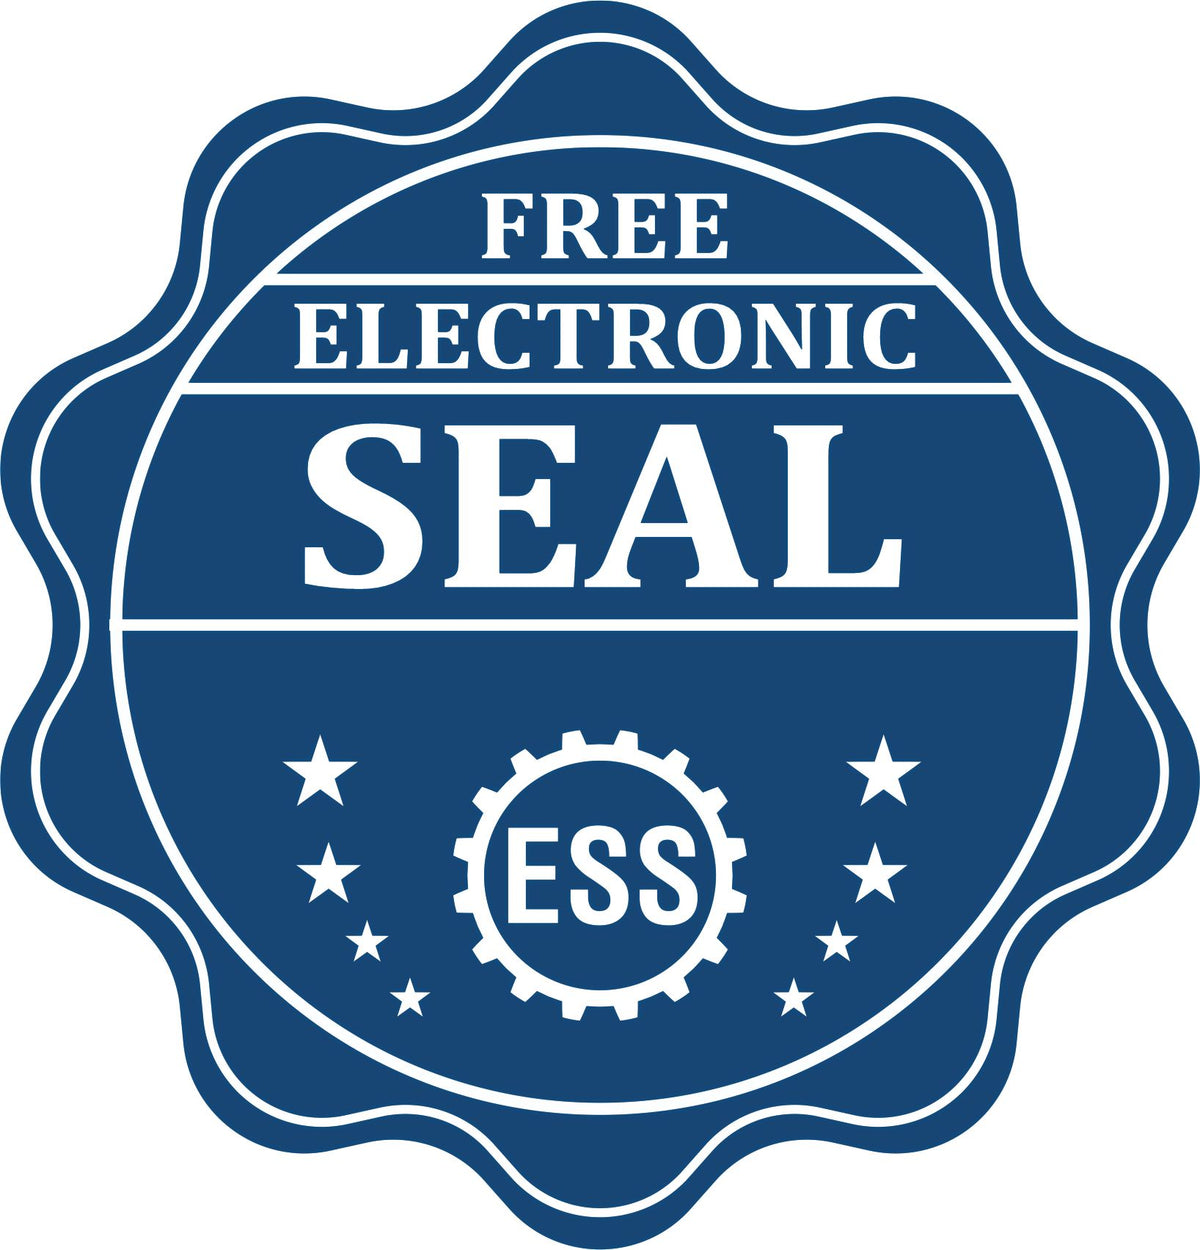 A badge showing a free electronic seal for the Self-Inking Rhode Island Landscape Architect Stamp with stars and the ESS gear on the emblem.